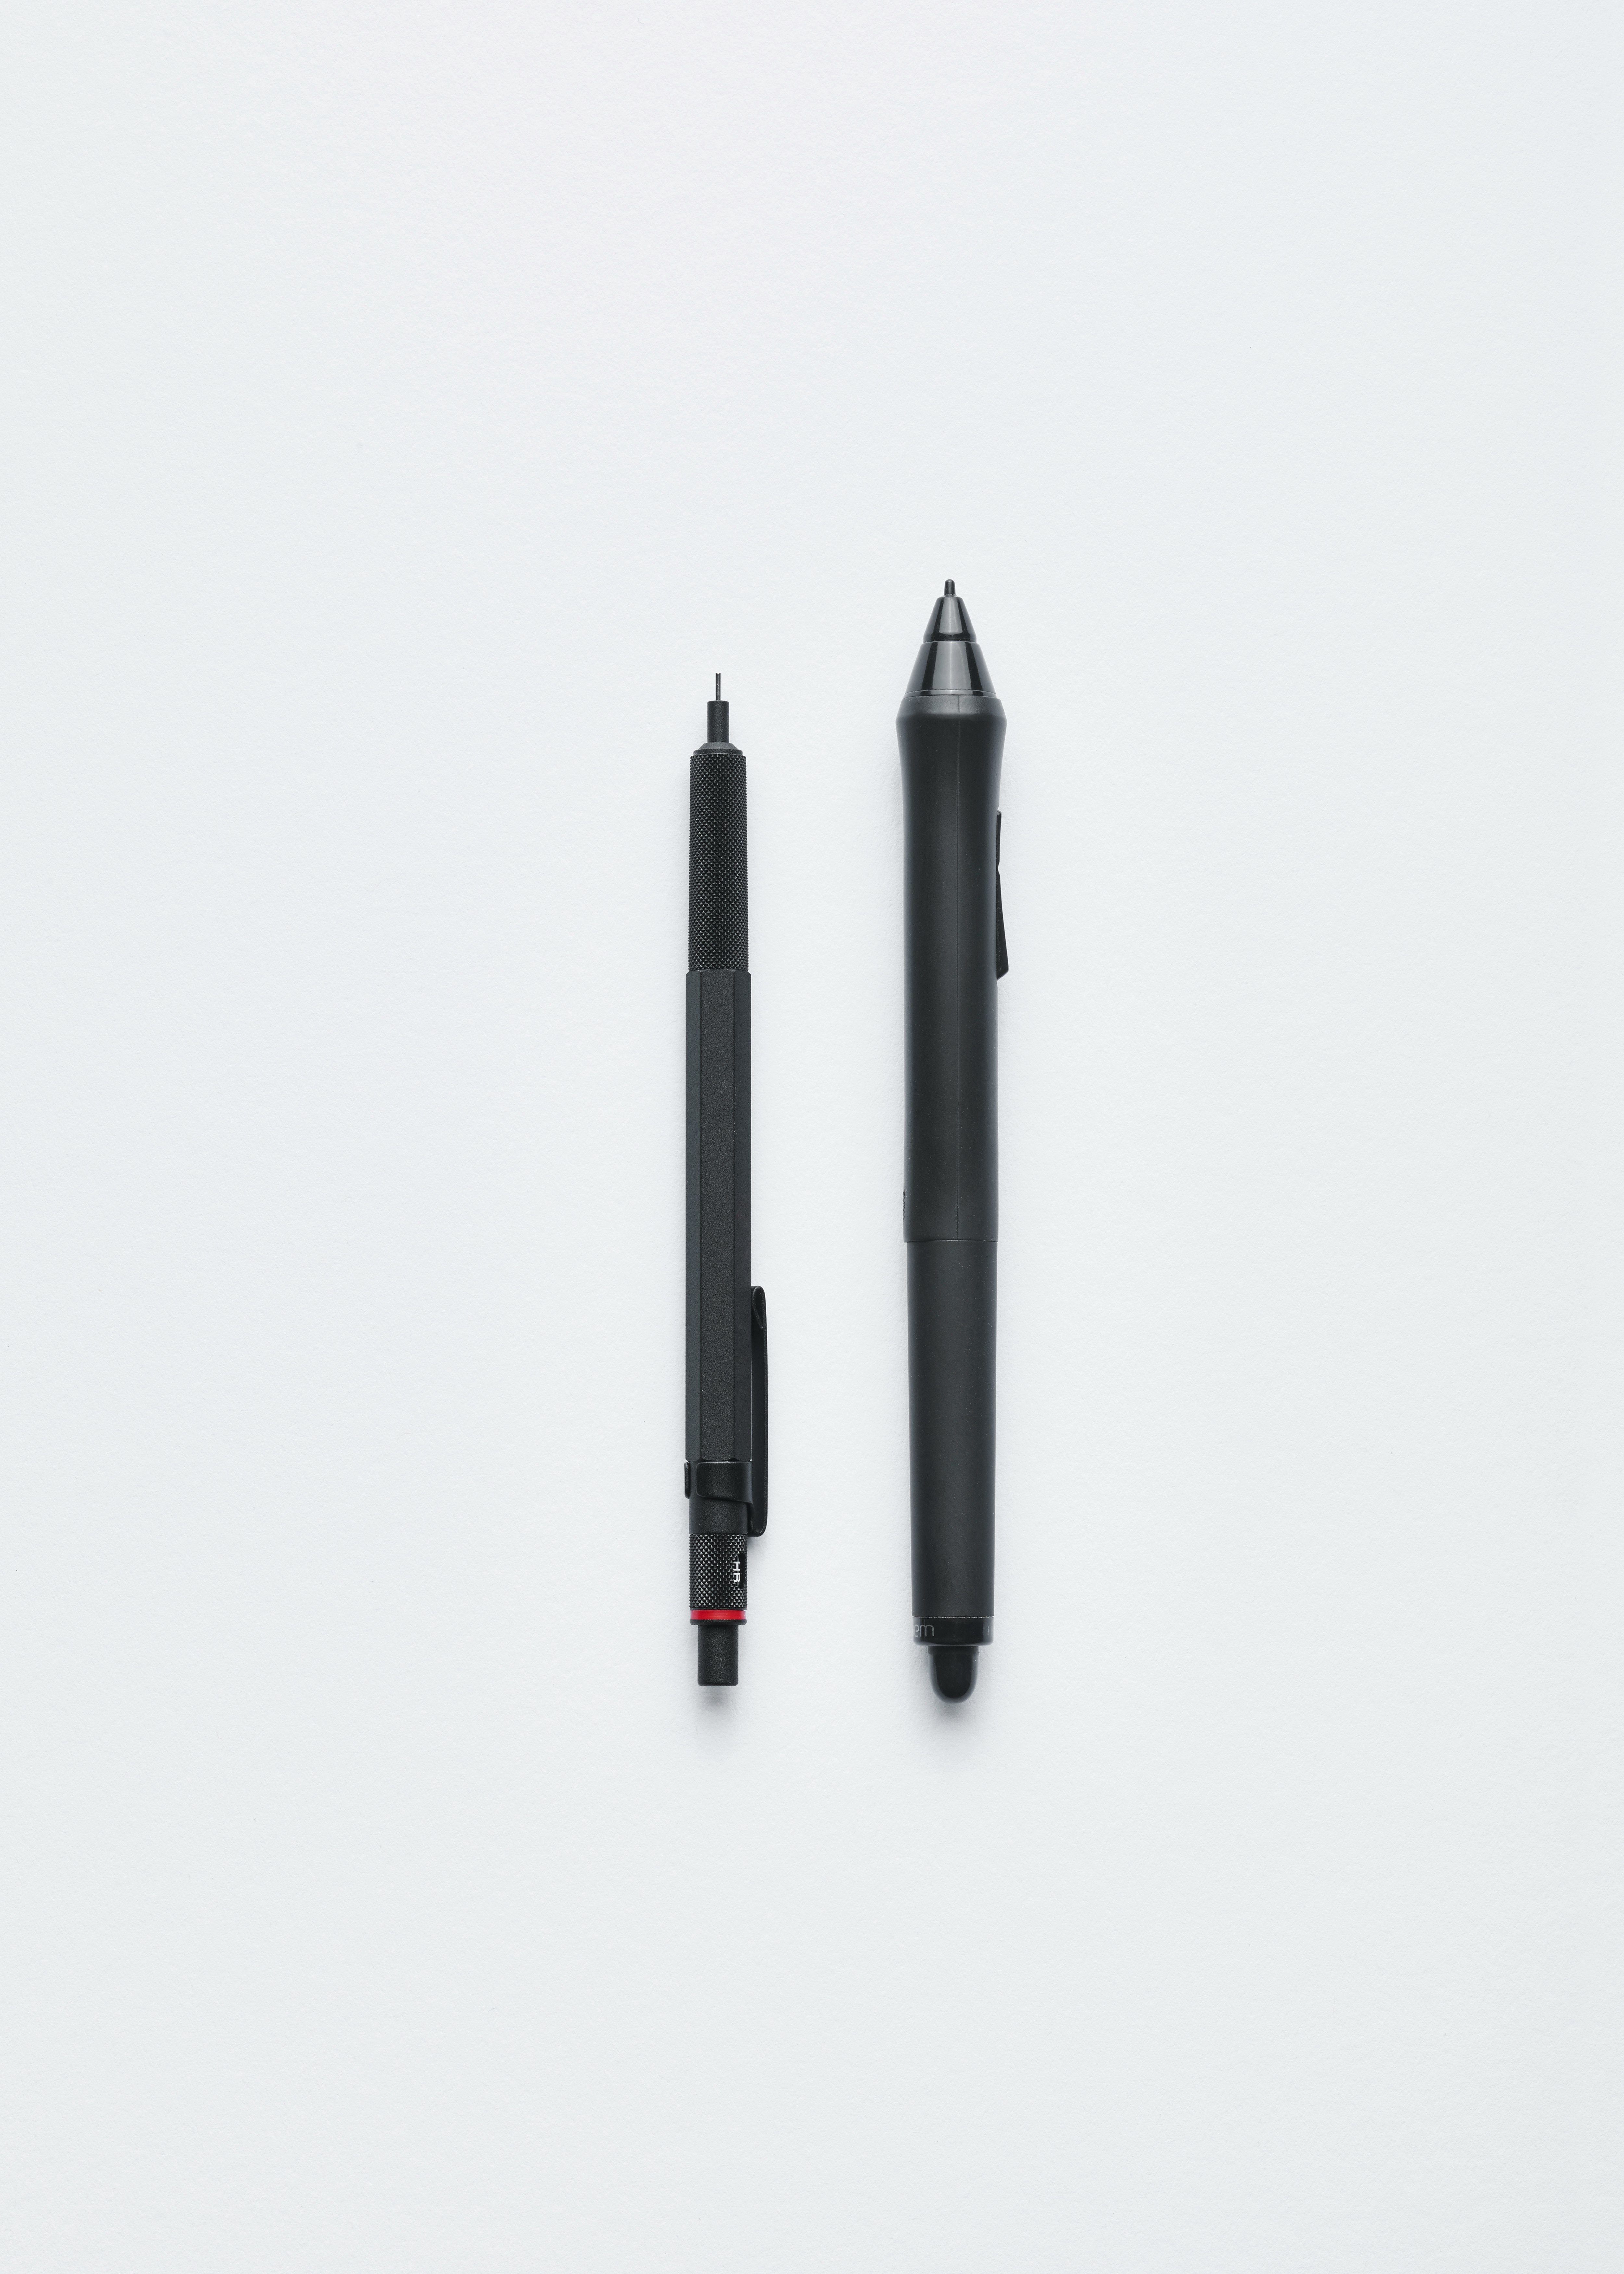 A mechanical pencil and a pen.